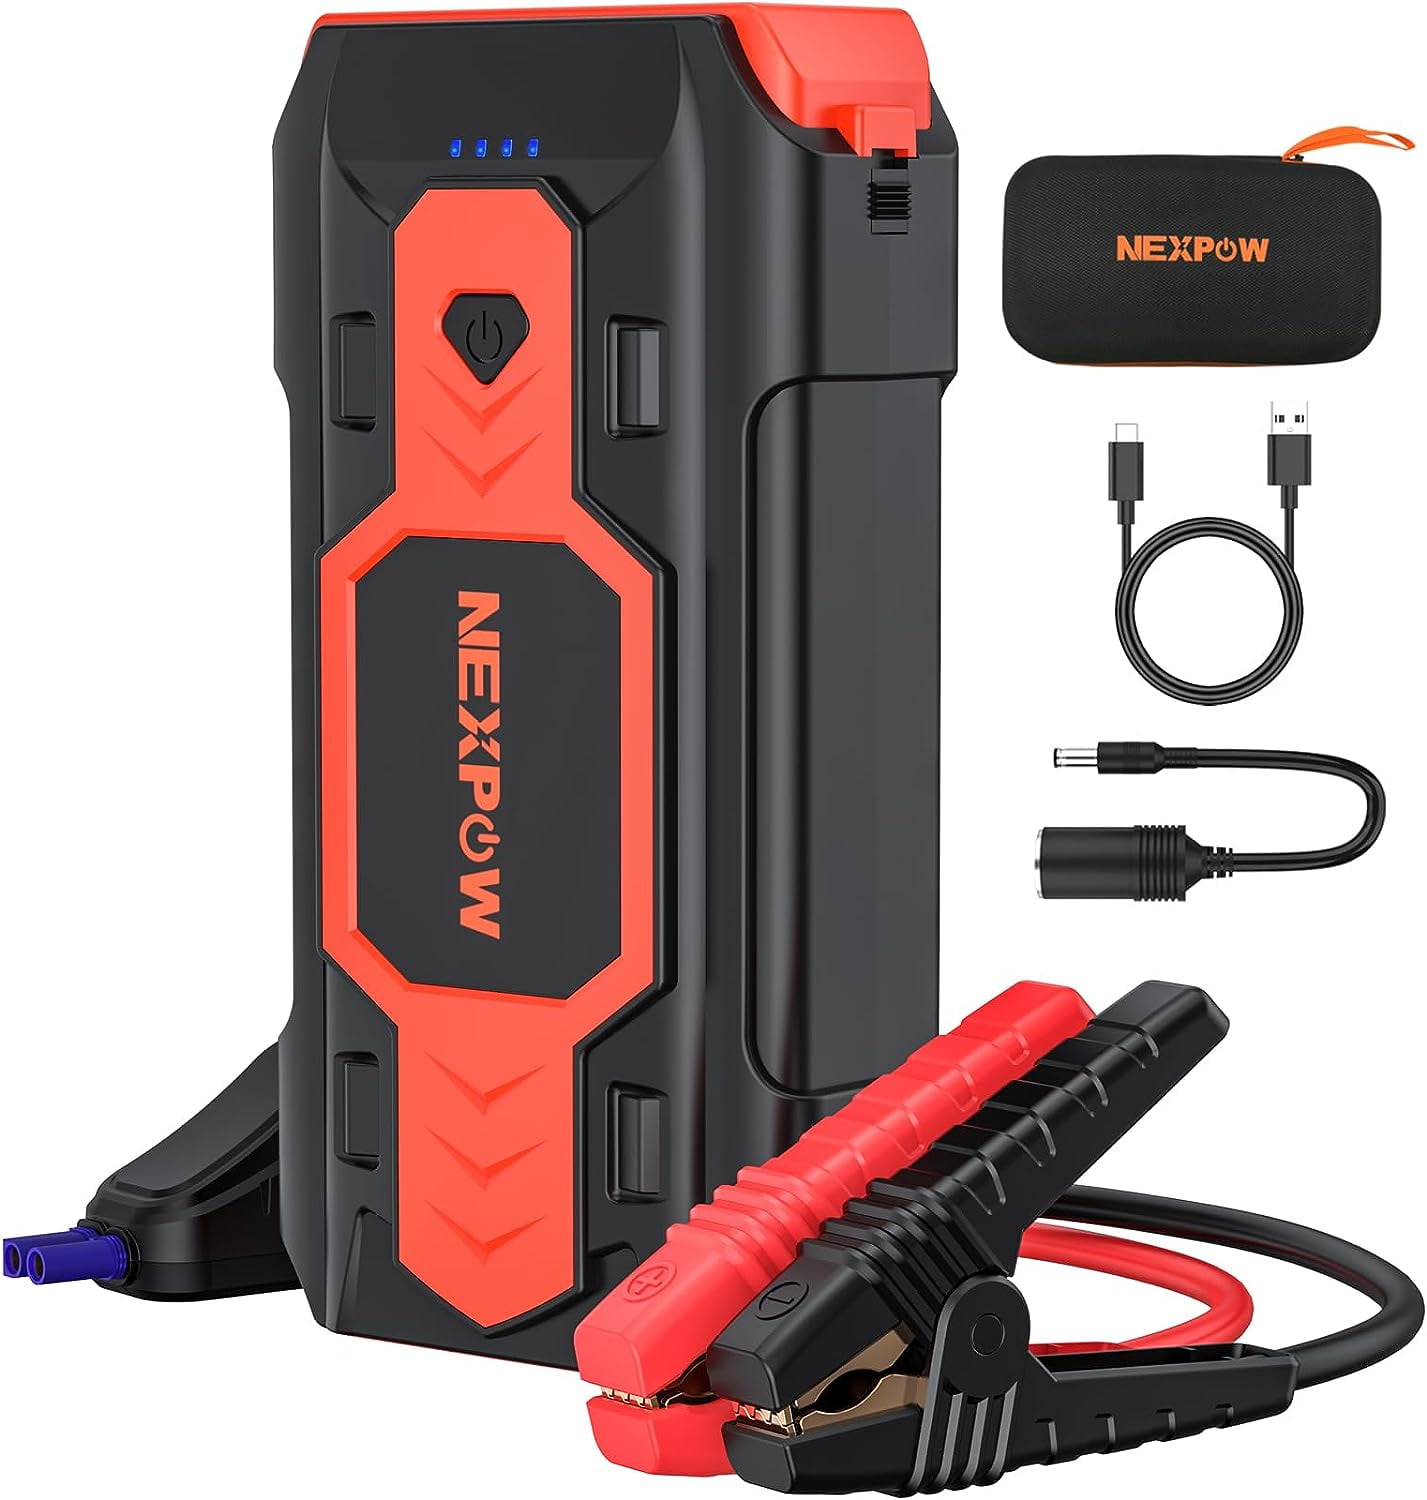 Get Back on the Road in No Time With This $80 Portable Avapow Jump Starter  - CNET